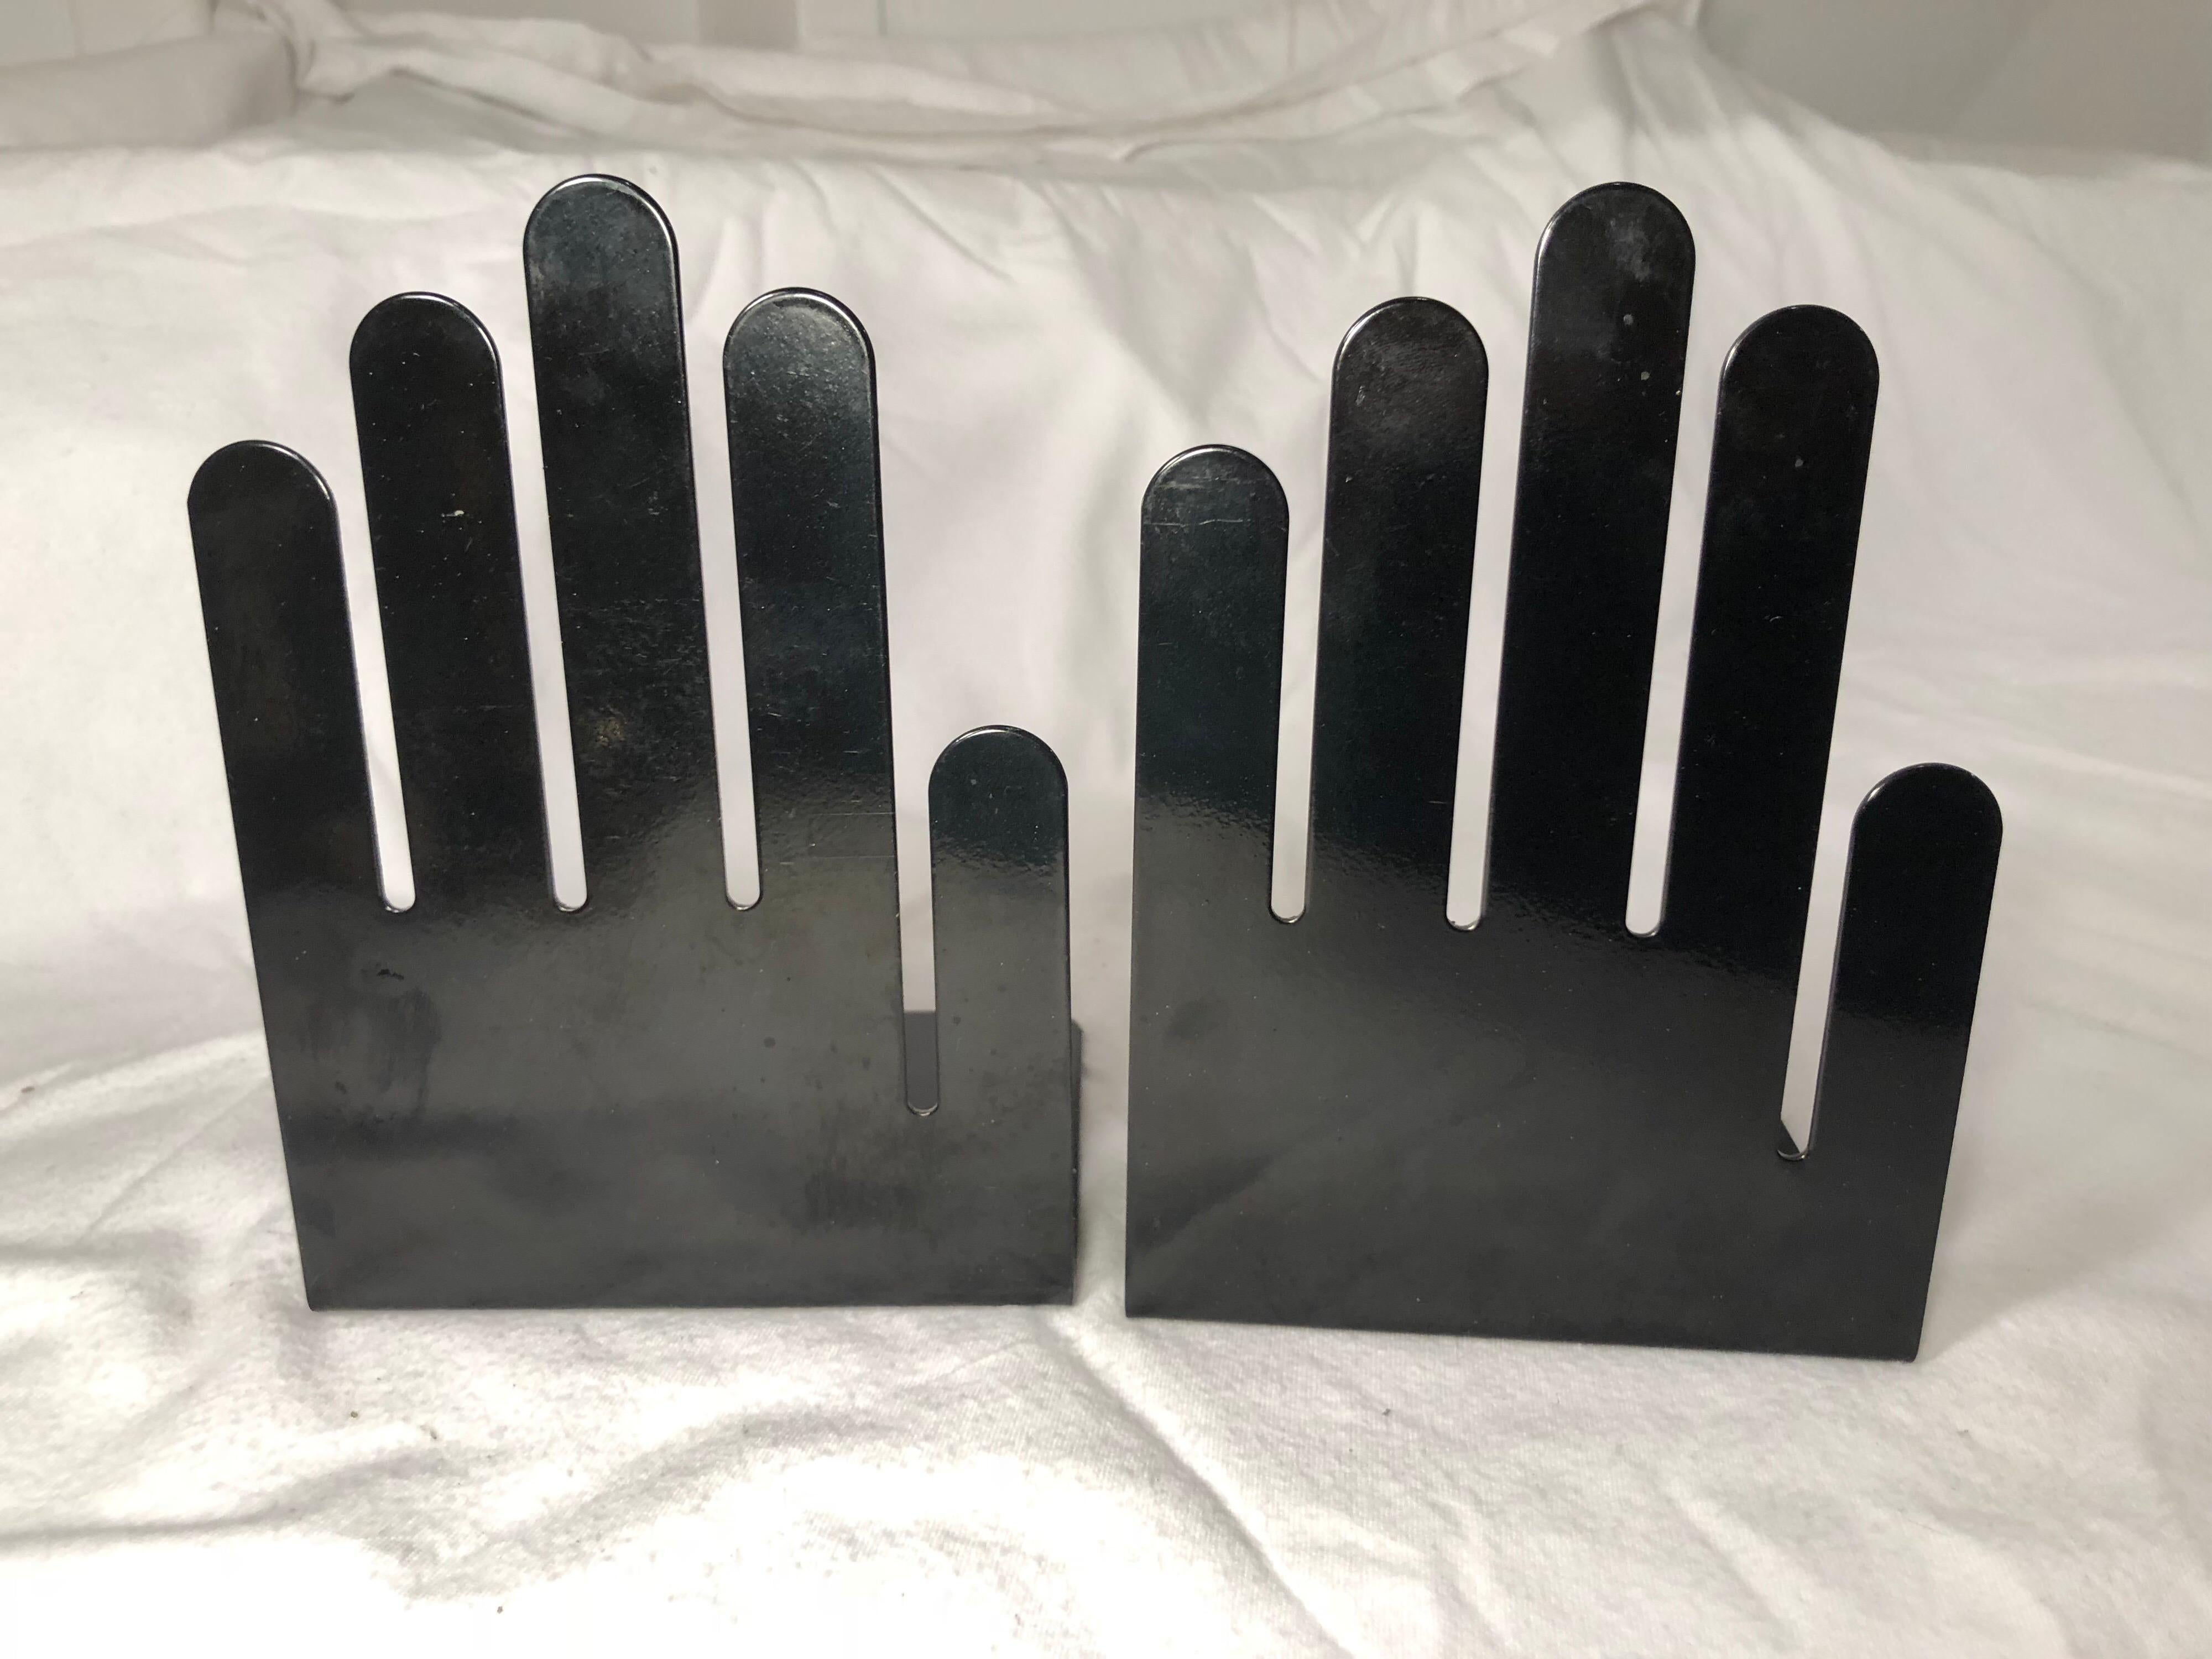 Pair of 1970s black metal hand bookends. Signed Spectrum Division Designs. Black metal hands to hold books, napkins or papers. Great Minimalist design.